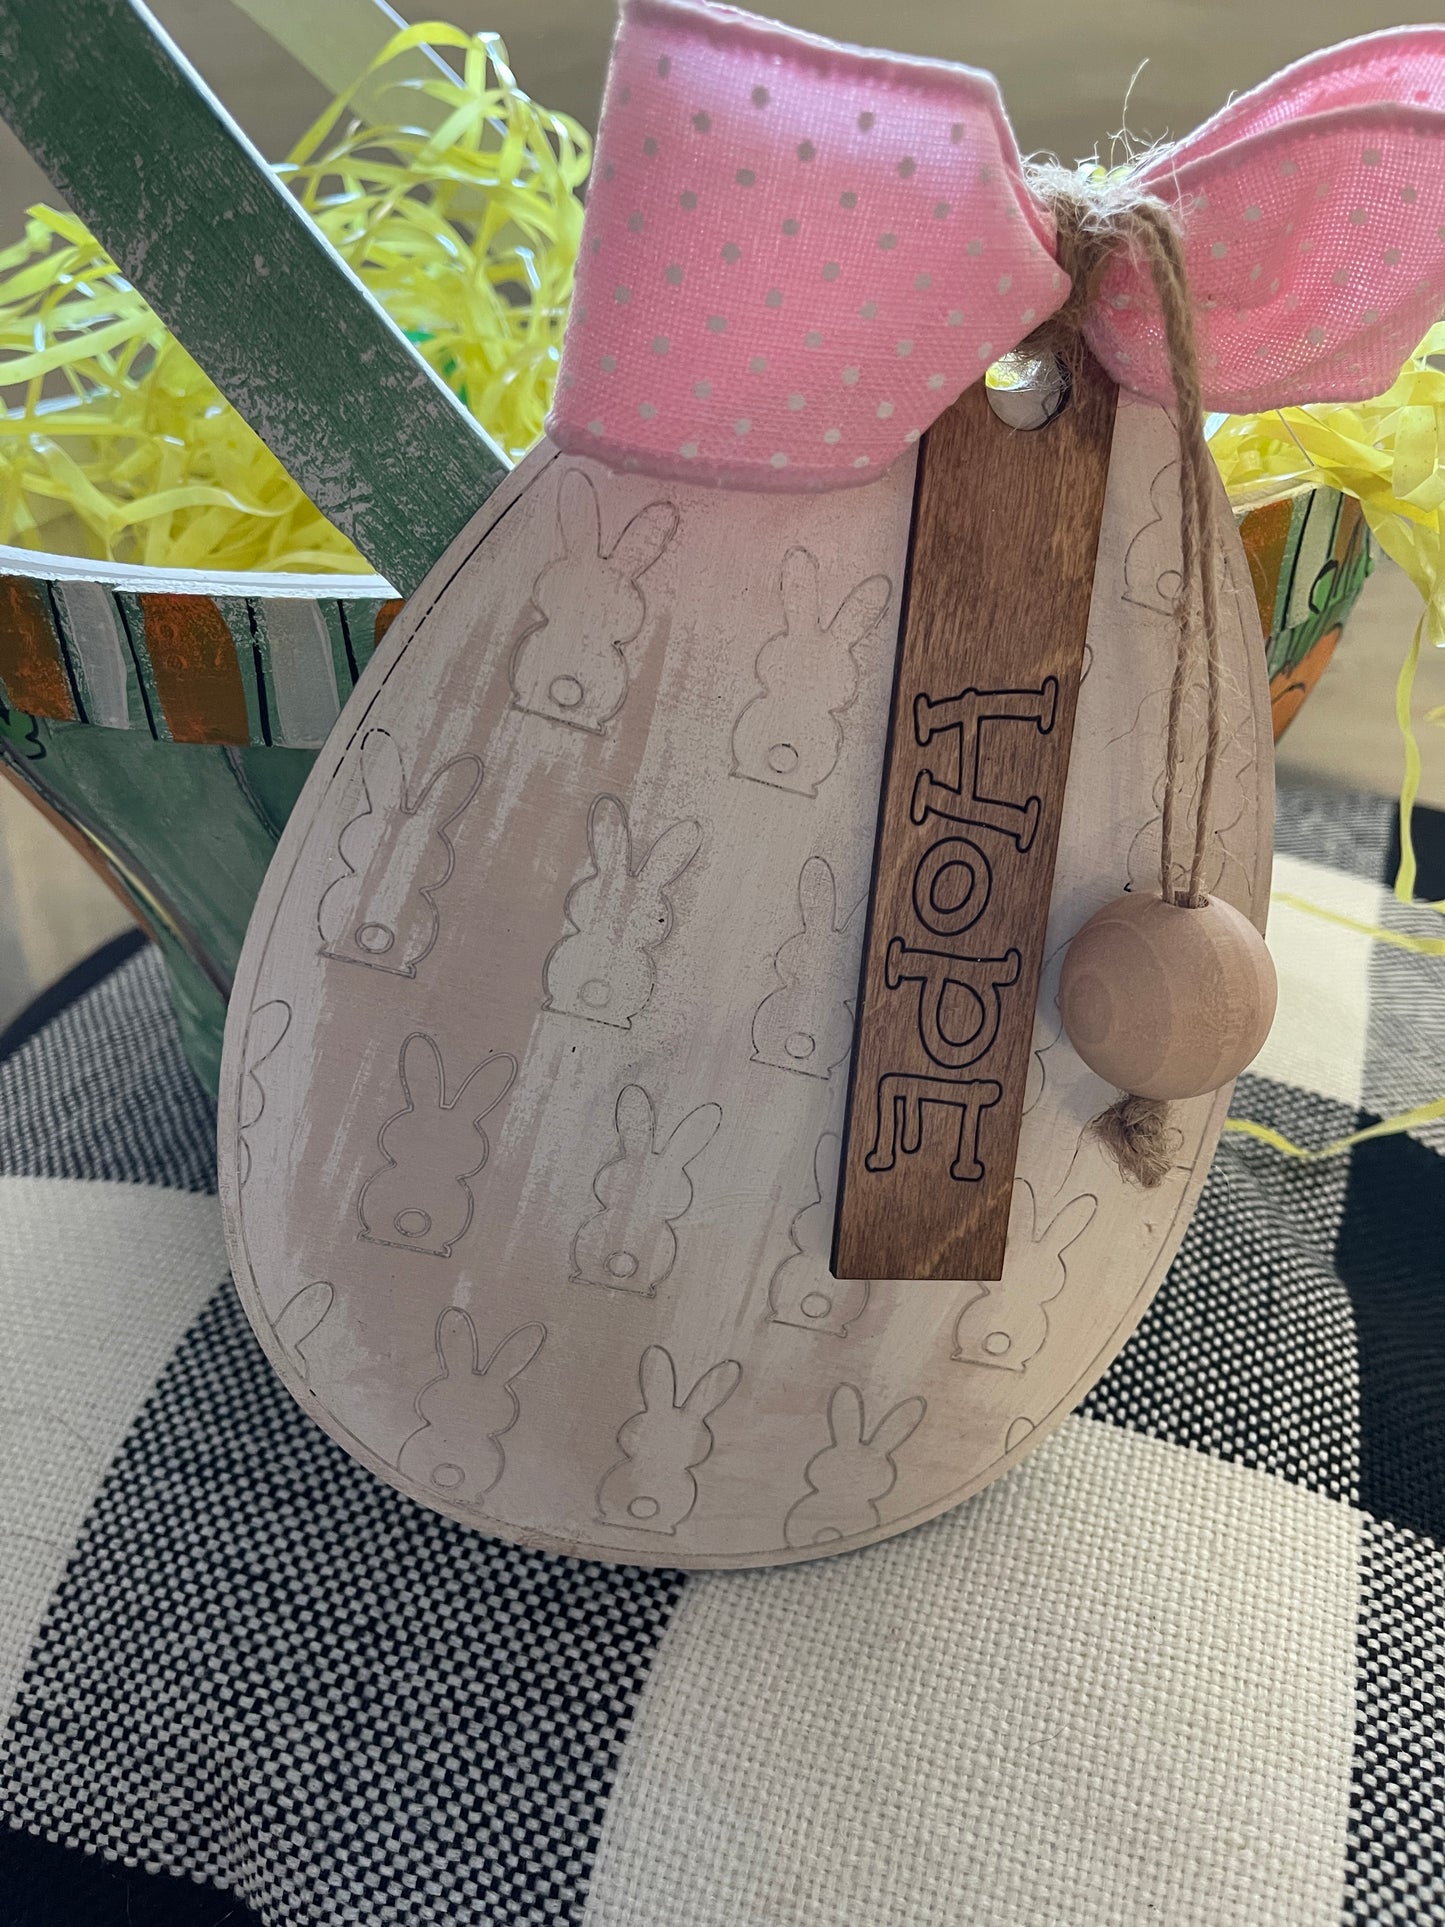 WHITE RABBIT EGG WITH STAINED TAG